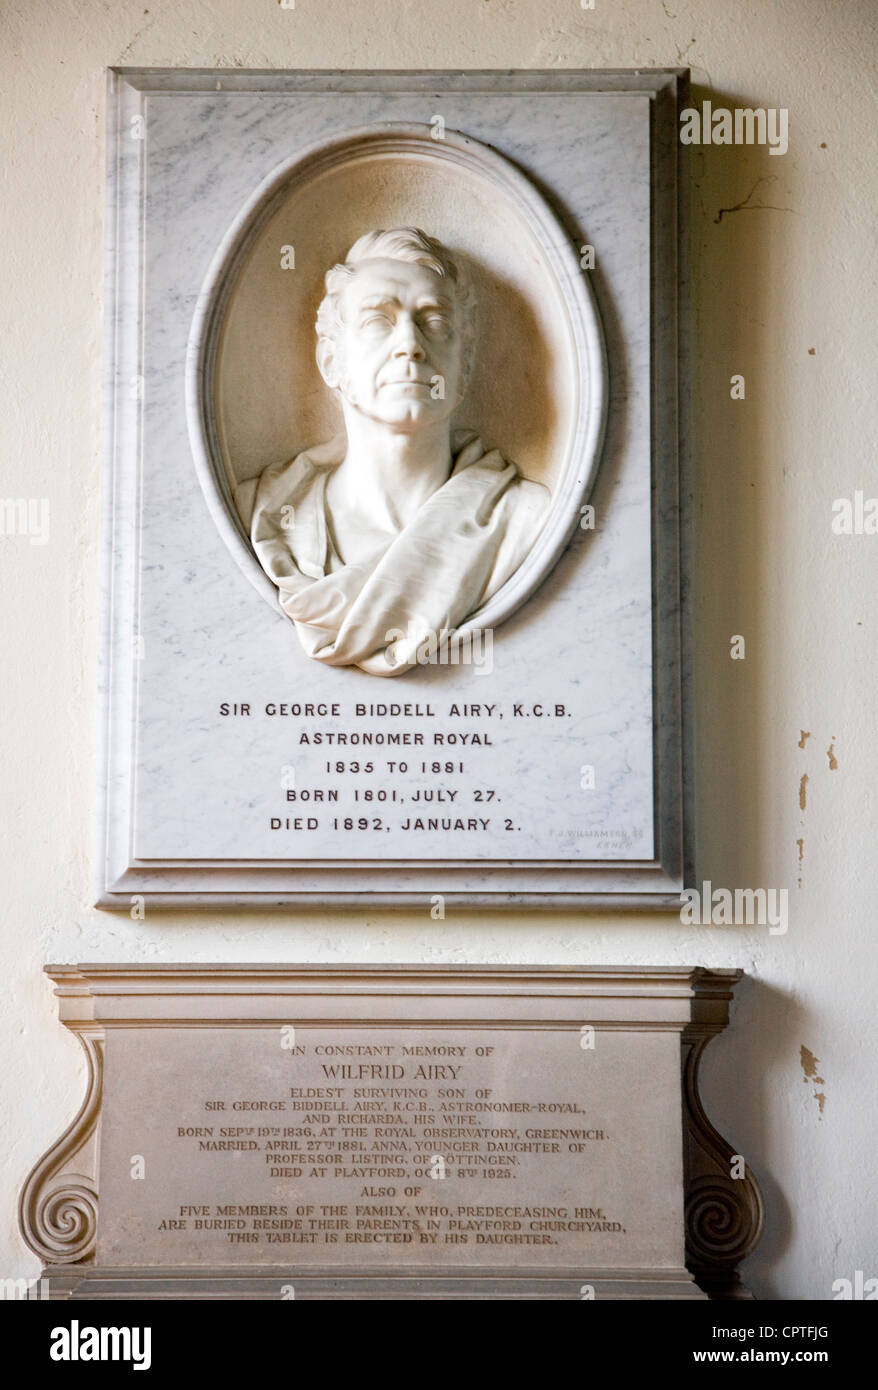 Sir George Biddell Airy Memorial astronome royal, l'église de Playford, Suffolk, Angleterre Banque D'Images